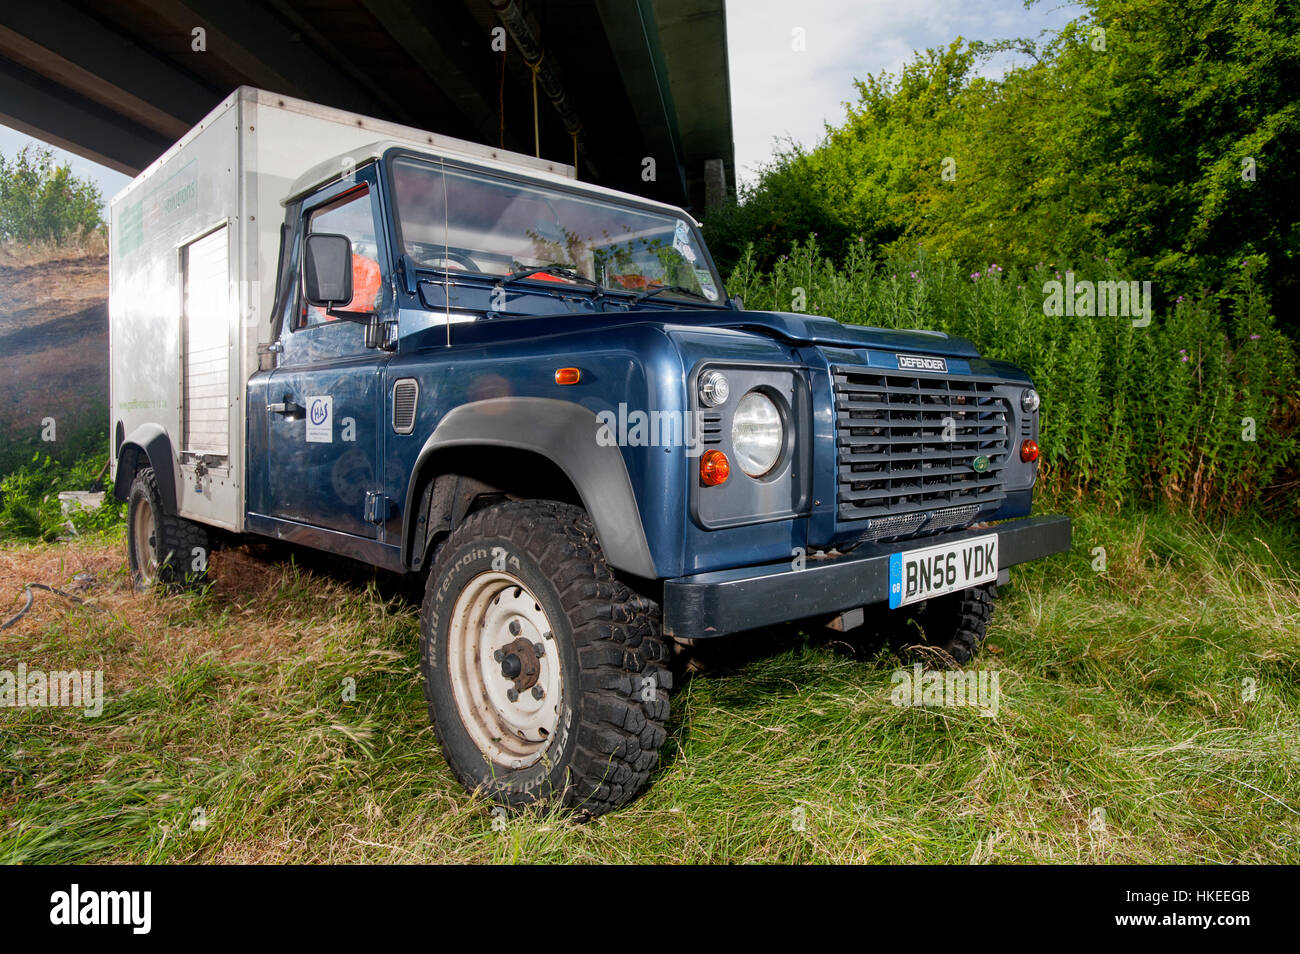 Working Land Rover Defender fitted with a high pressure pump in a box truck back Stock Photo